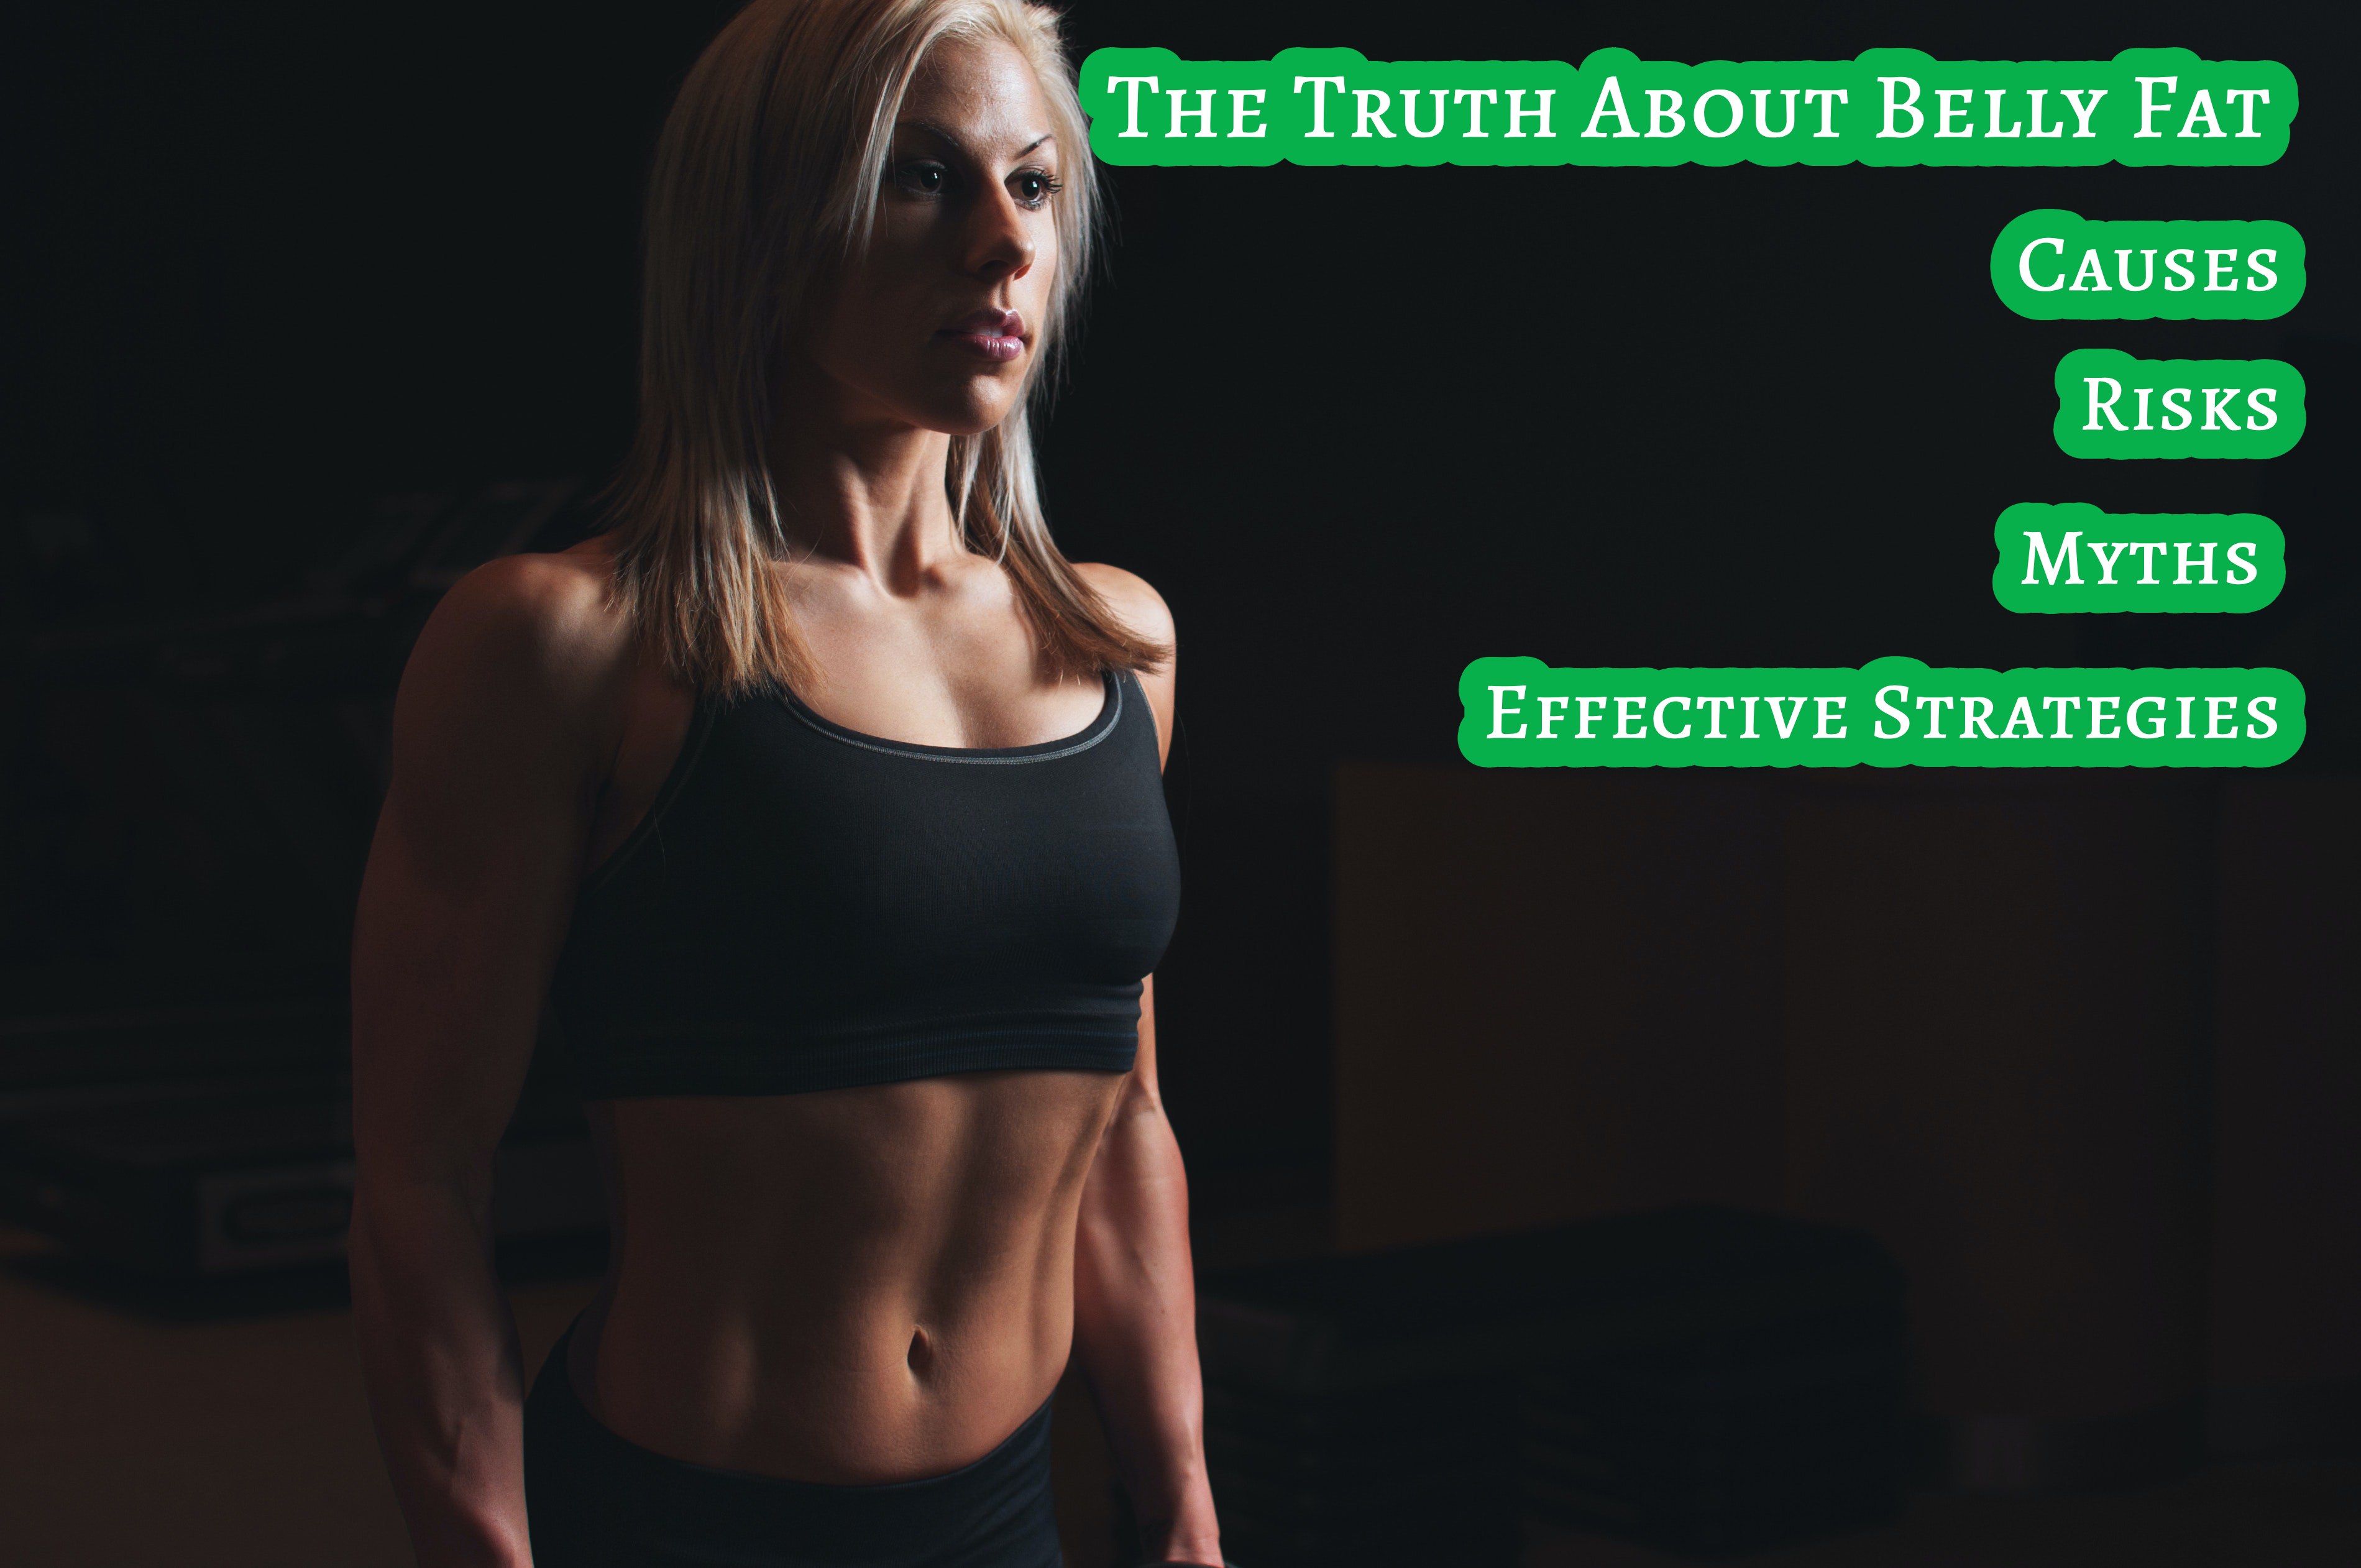 The Truth About Belly Fat: Causes, Risks, Myths, and Effective Strategies